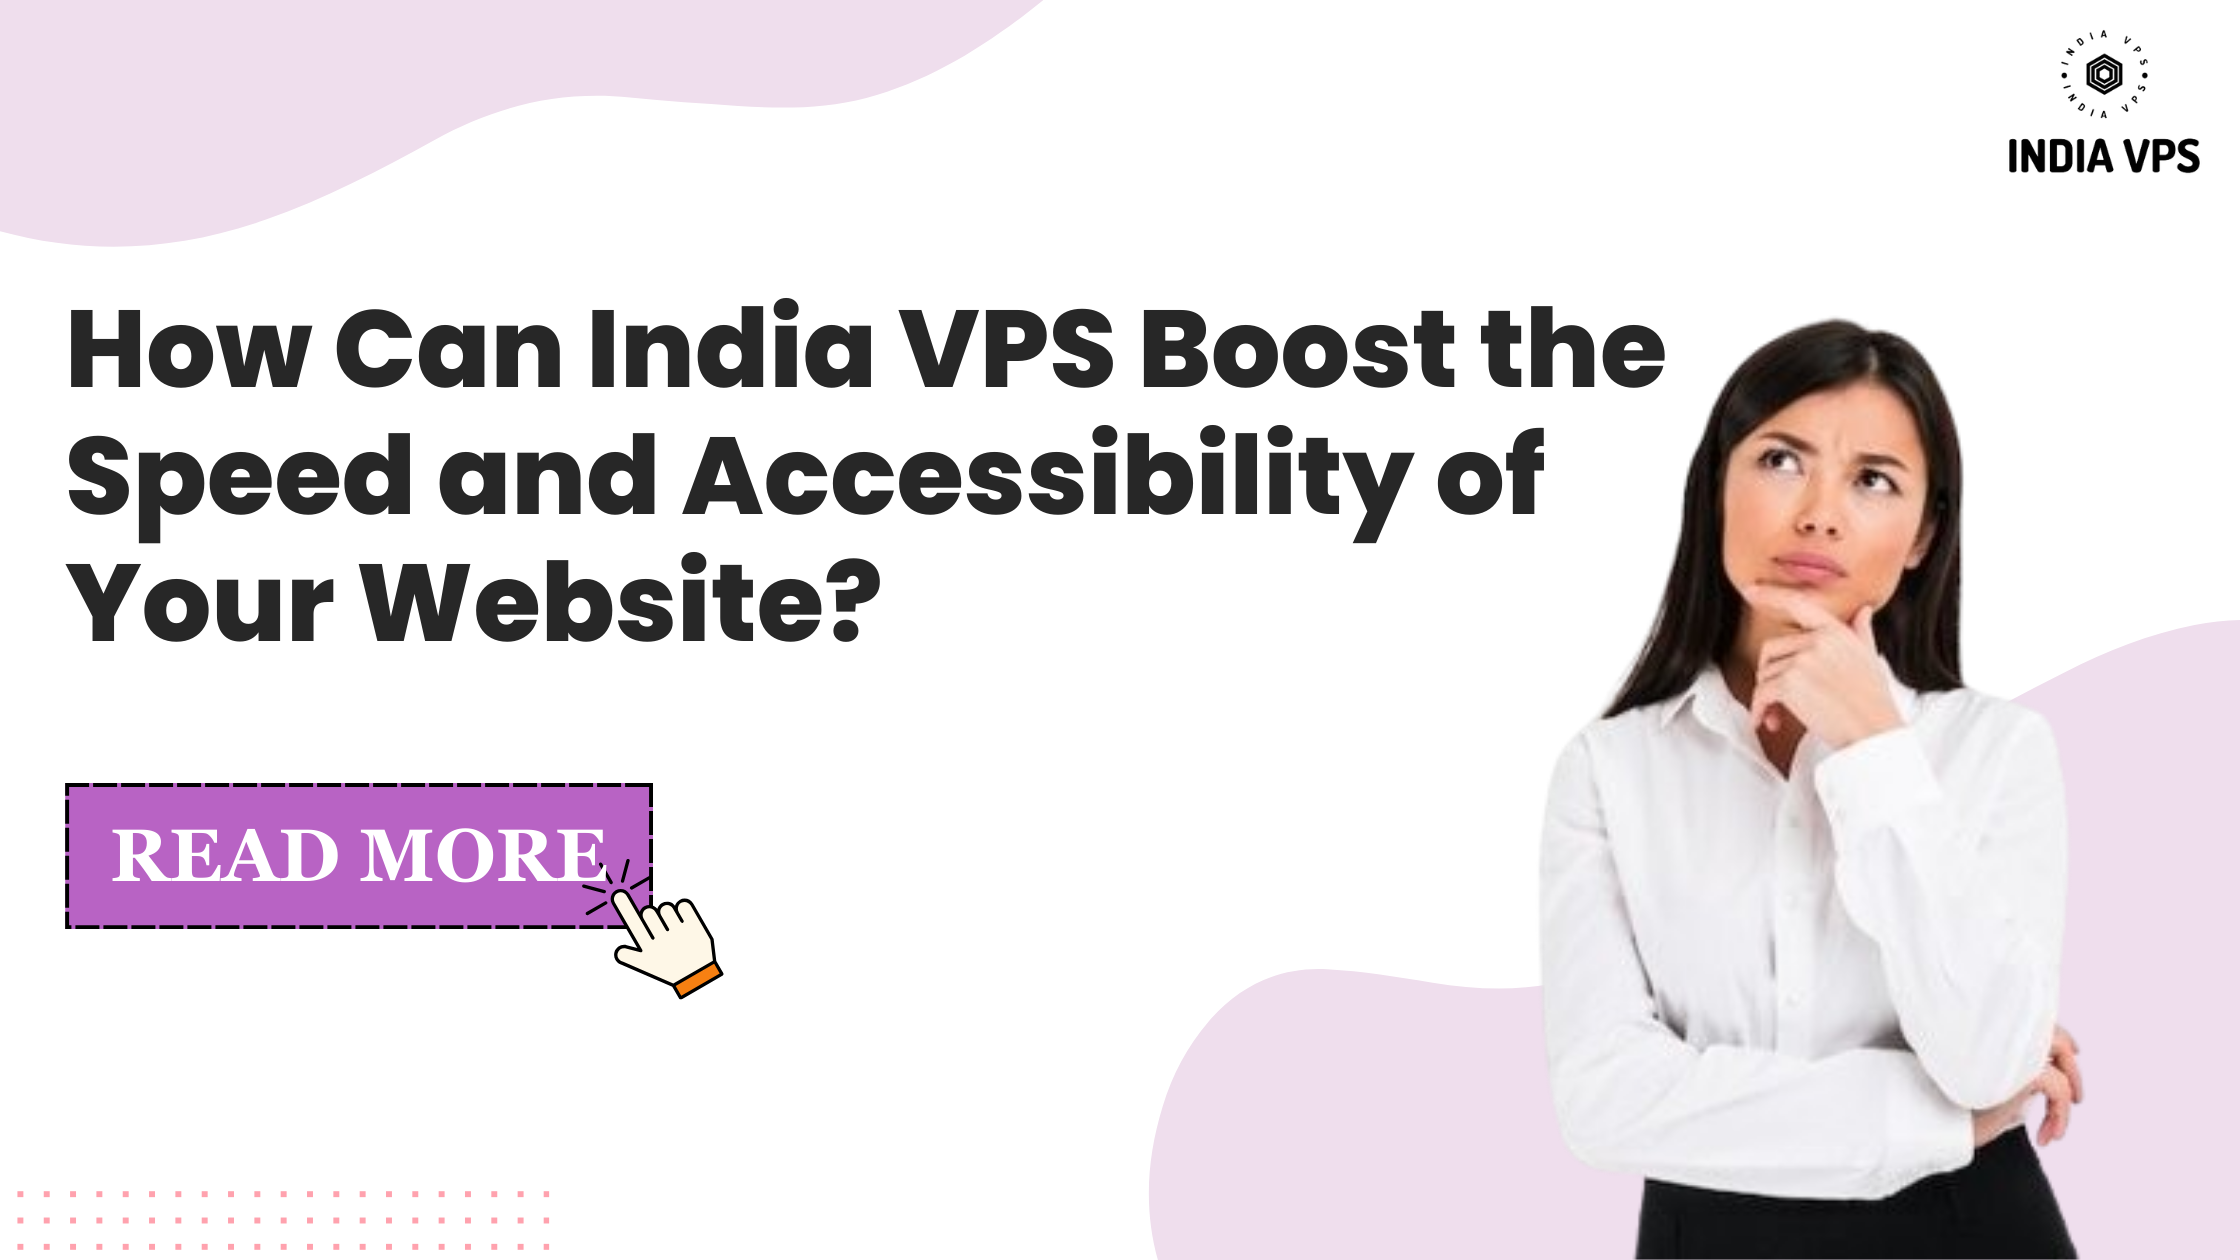 How Can India VPS Boost the Speed and Accessibility of Your Website?